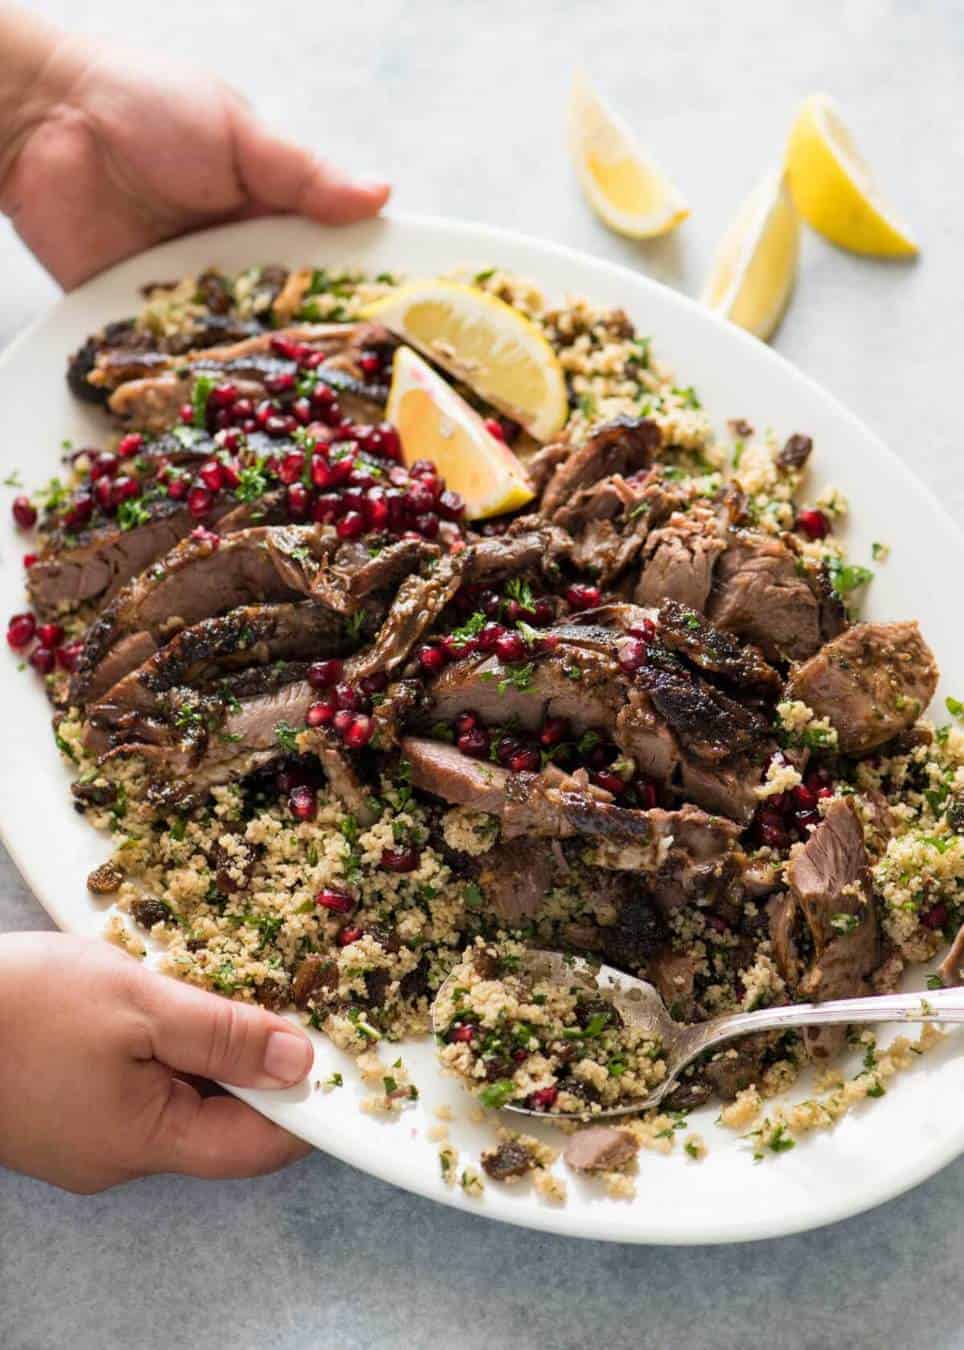 Slow Cooked Lamb Shawarma is meltingly tender and has the most heavenly fragrance. Quick to prepare, sensational for gatherings! www.recipetineats.com